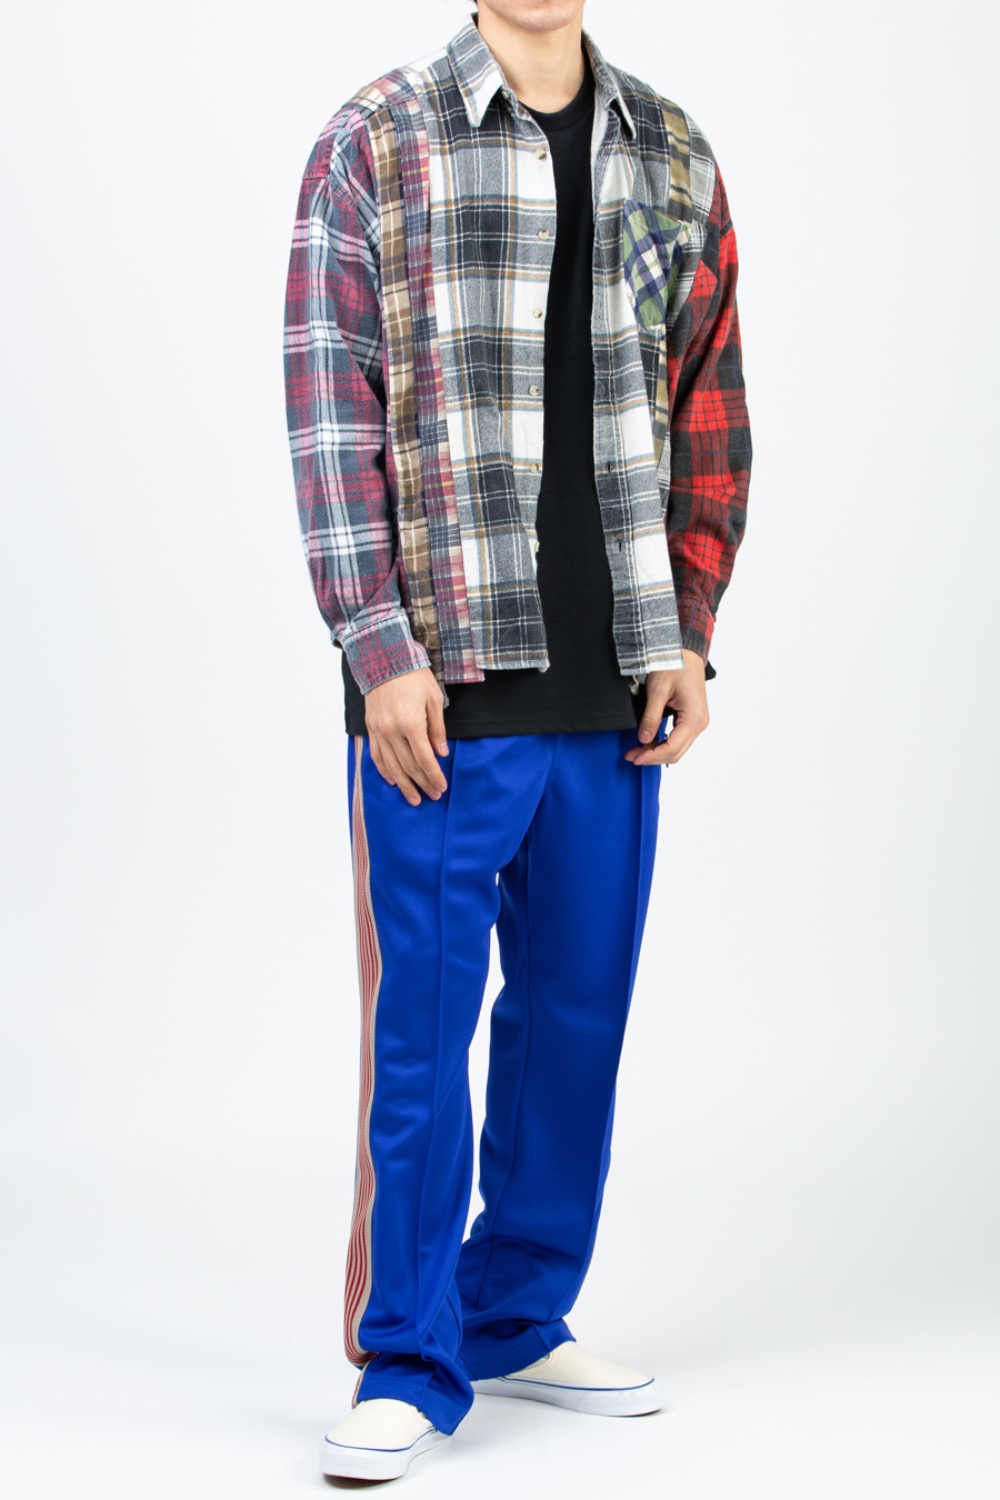 (7CUT-12)REBUILD BY NEEDLES FLANNEL SHIRT - 7 CUTS WIDE SHIRT ASSORTED